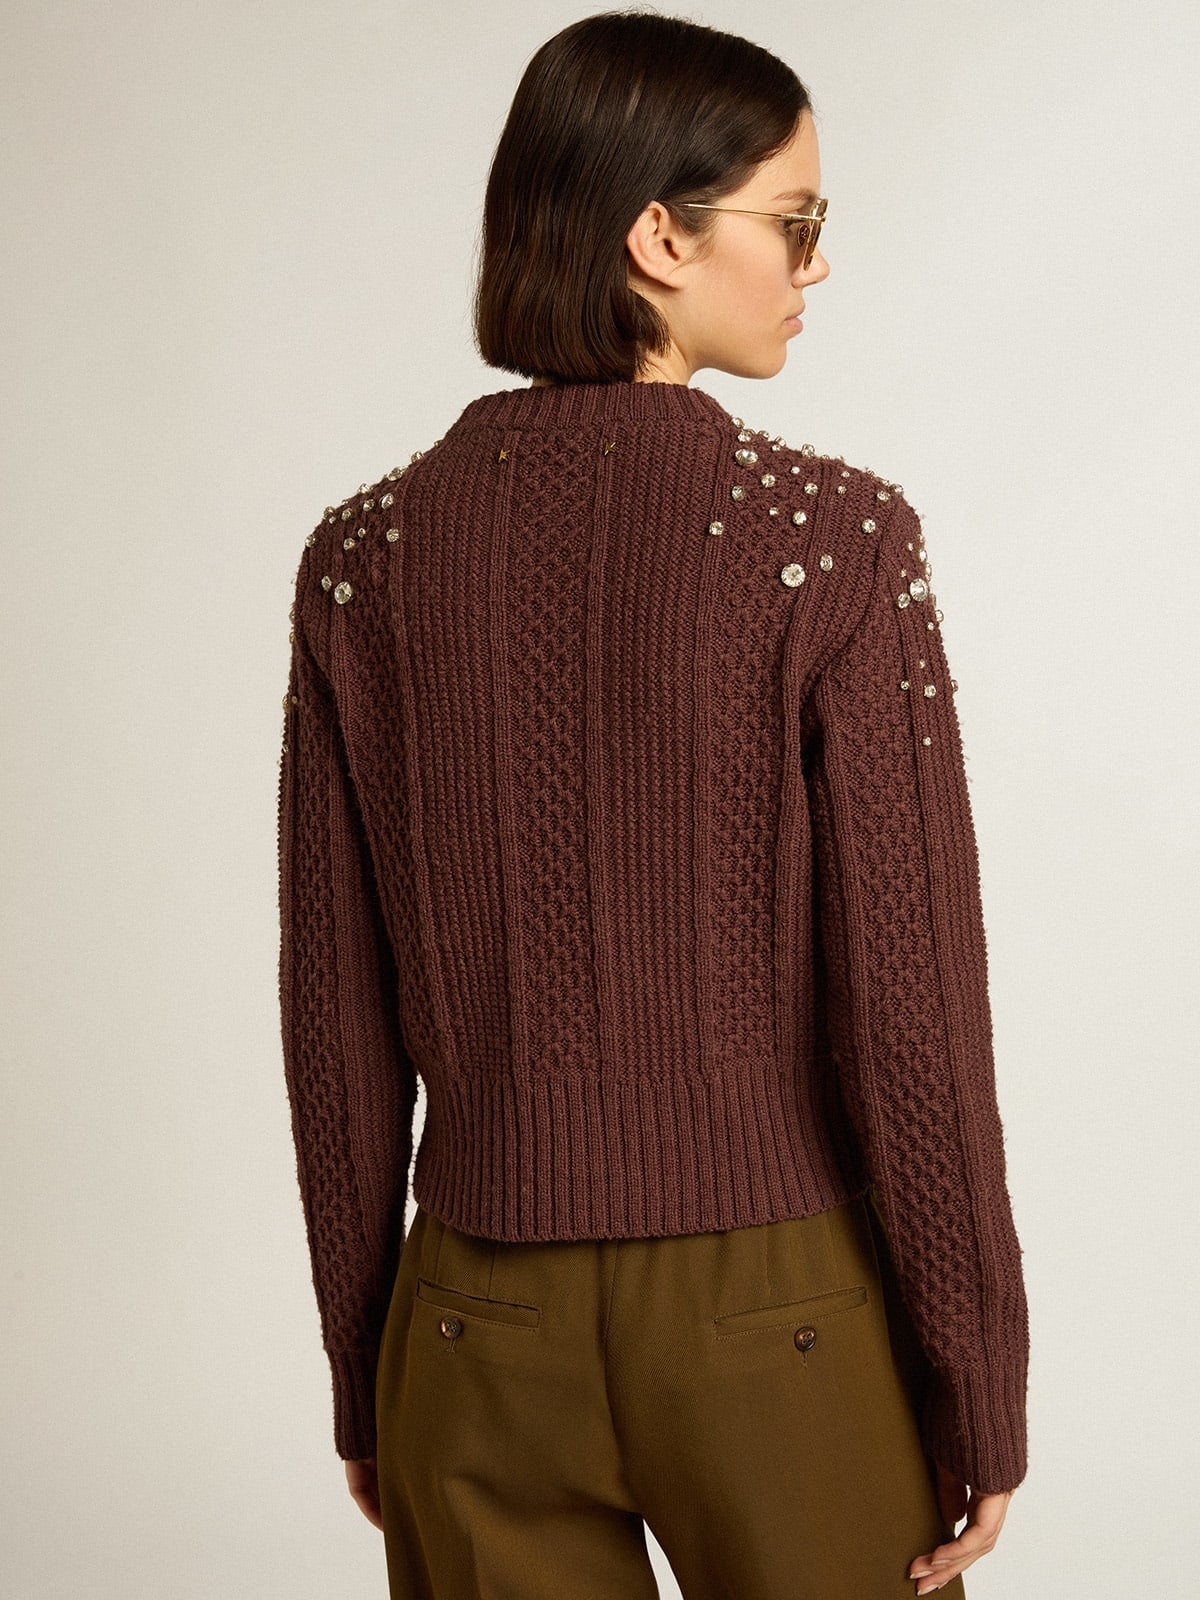 Cropped sweater in burgundy wool with crystals - 4